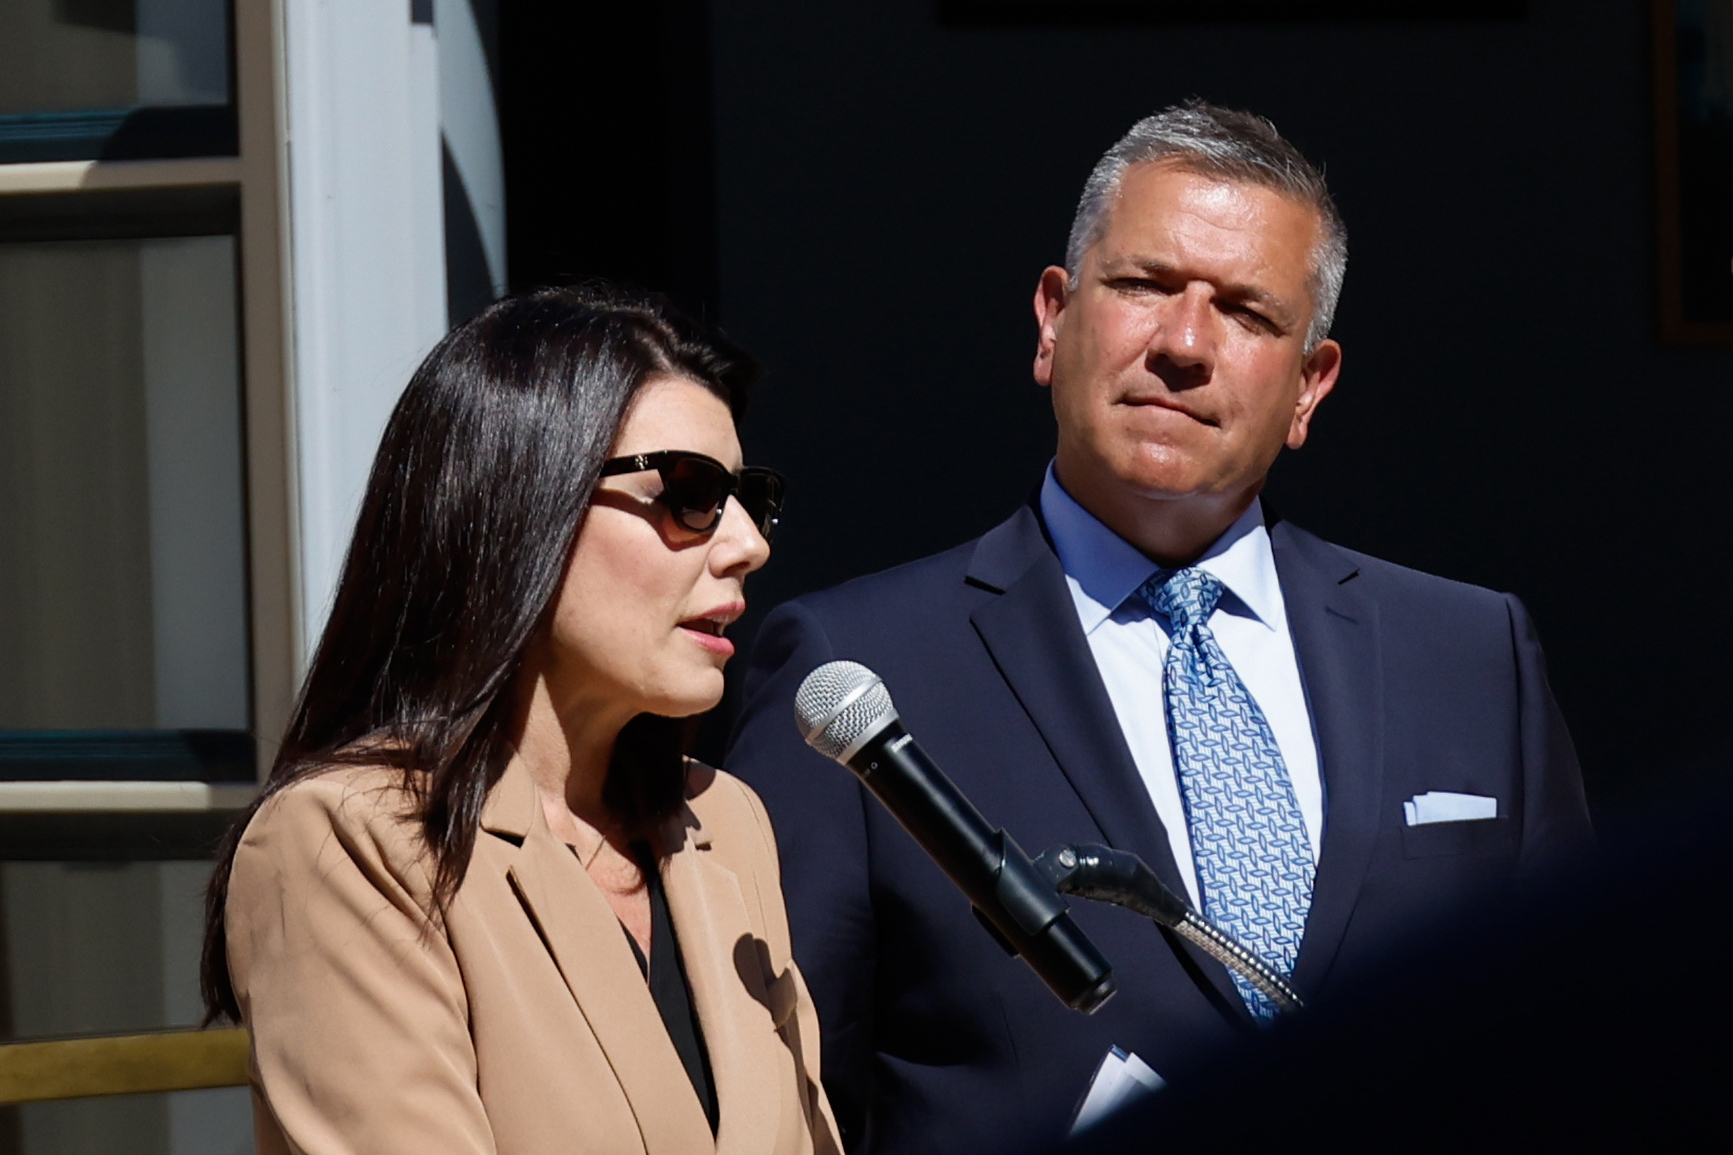 A man and woman, both in professional attire, stand beside a microphone under sunlight.